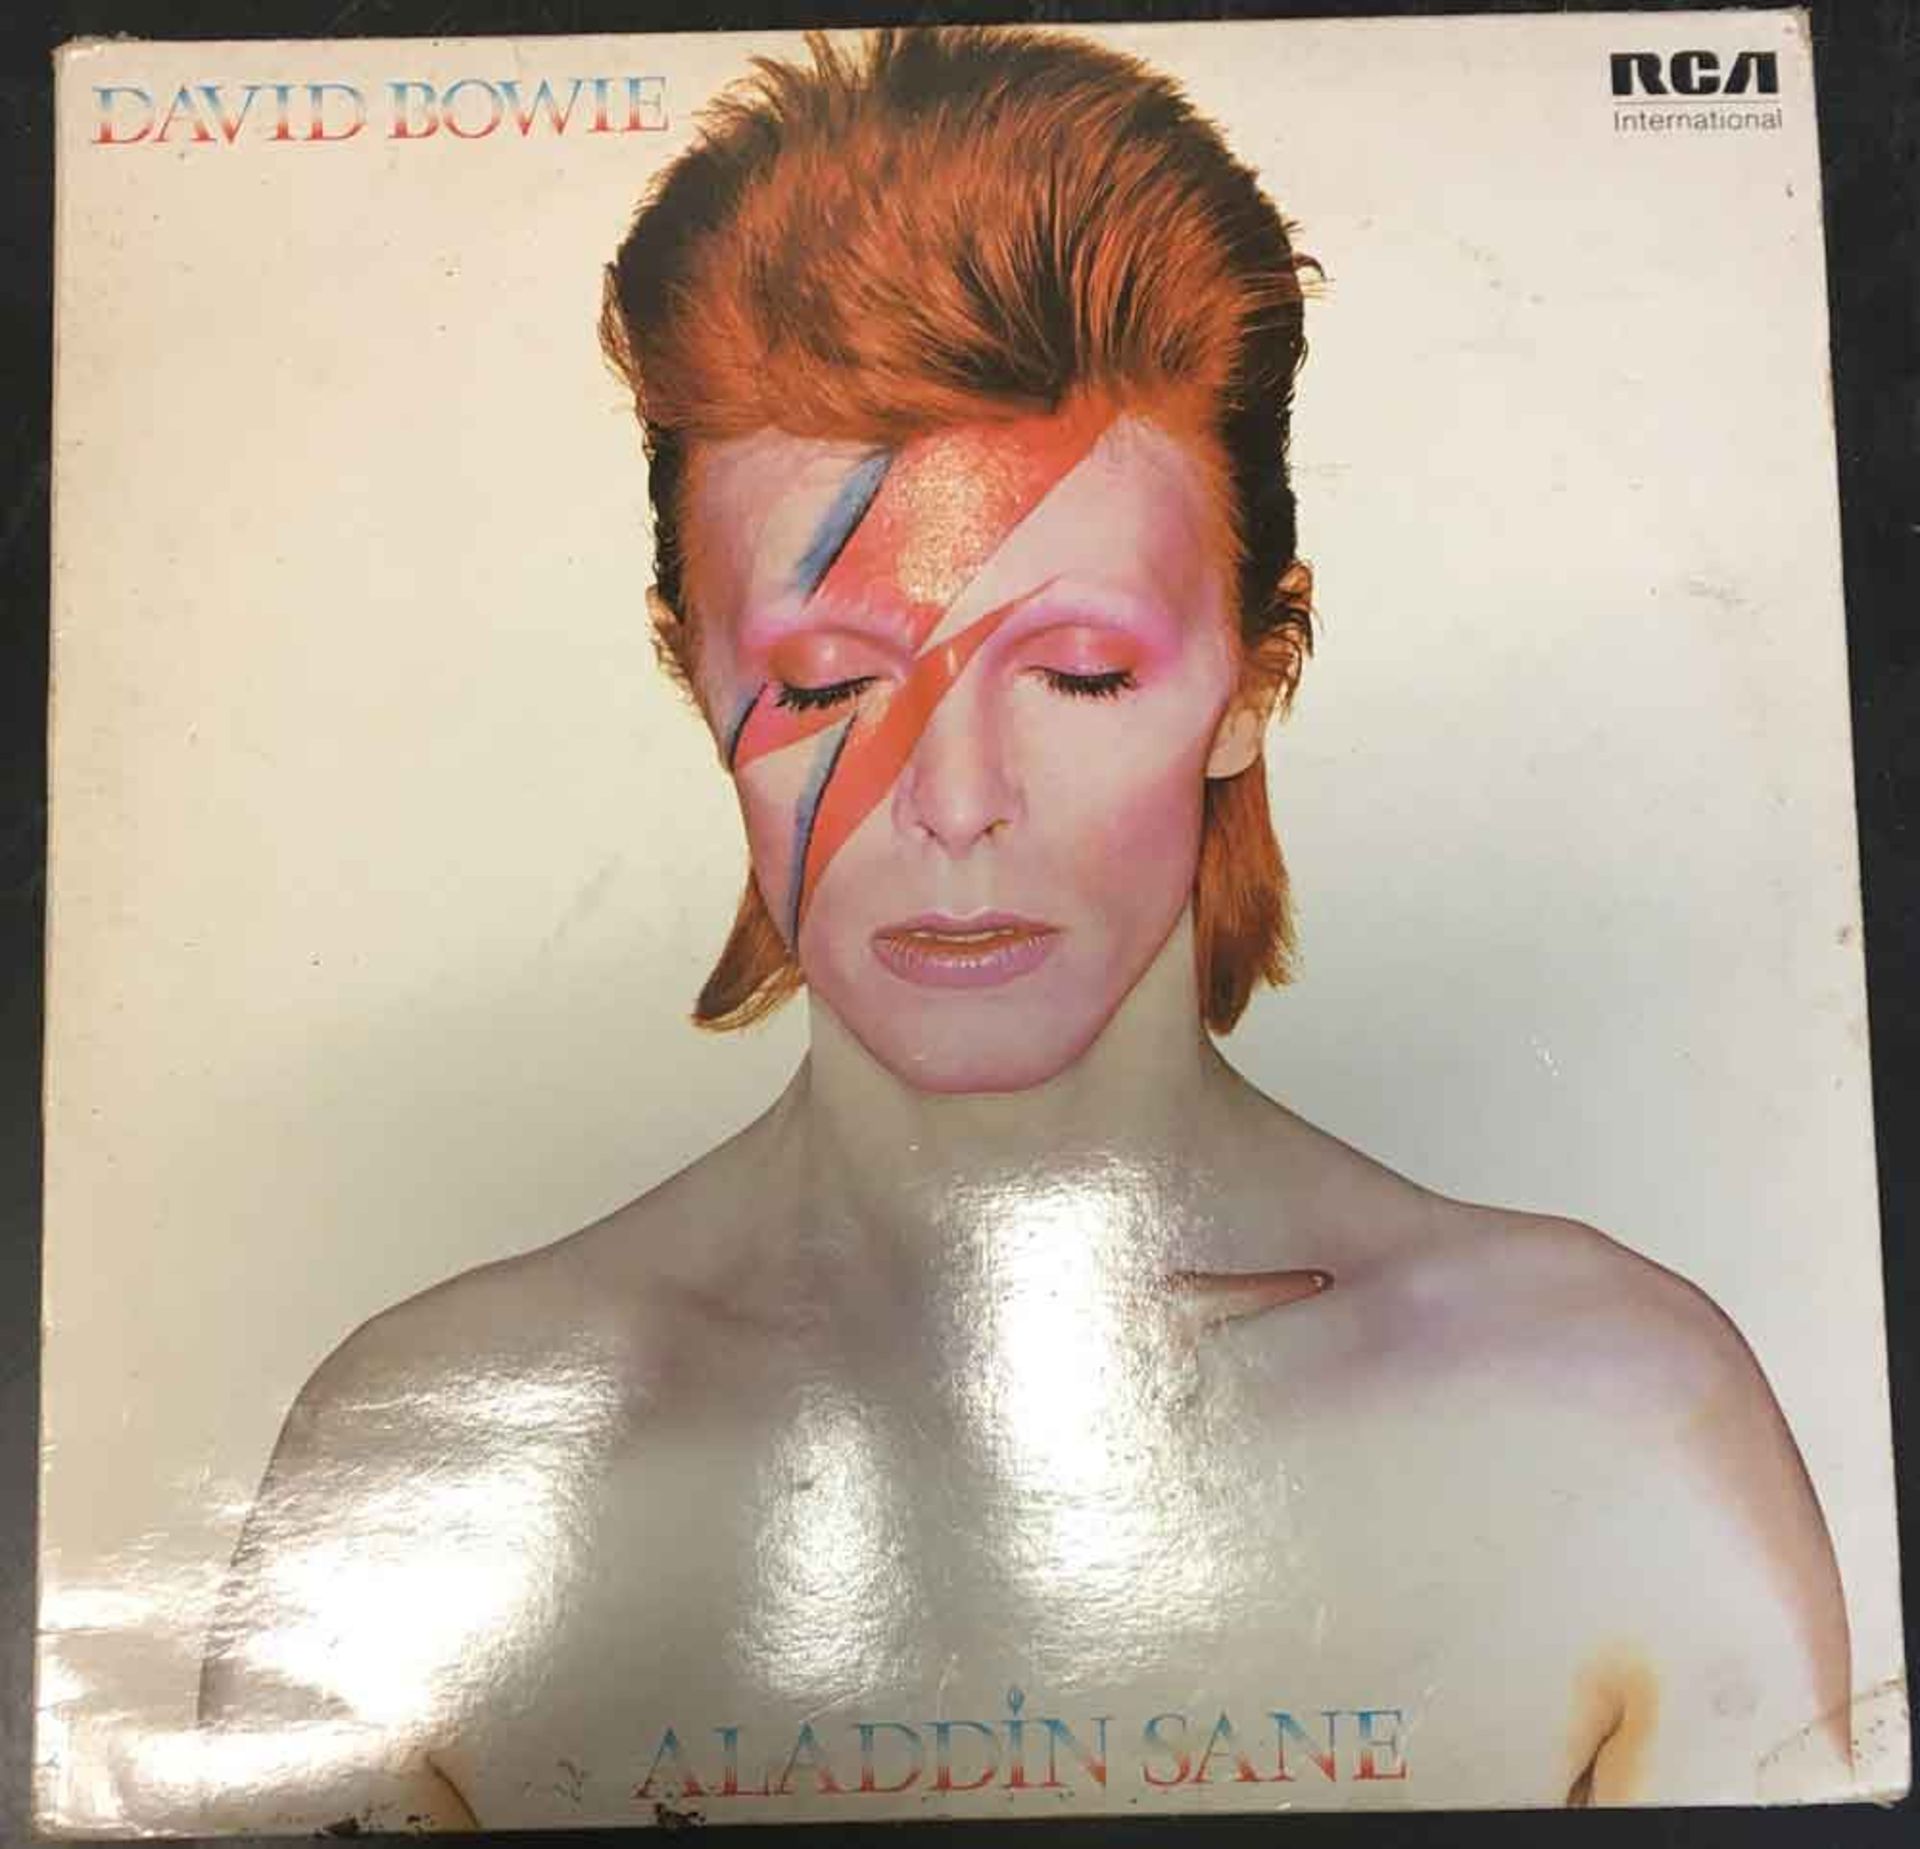 A Collection of Vinyl LP's, Queen, Bowie etc - Image 13 of 14